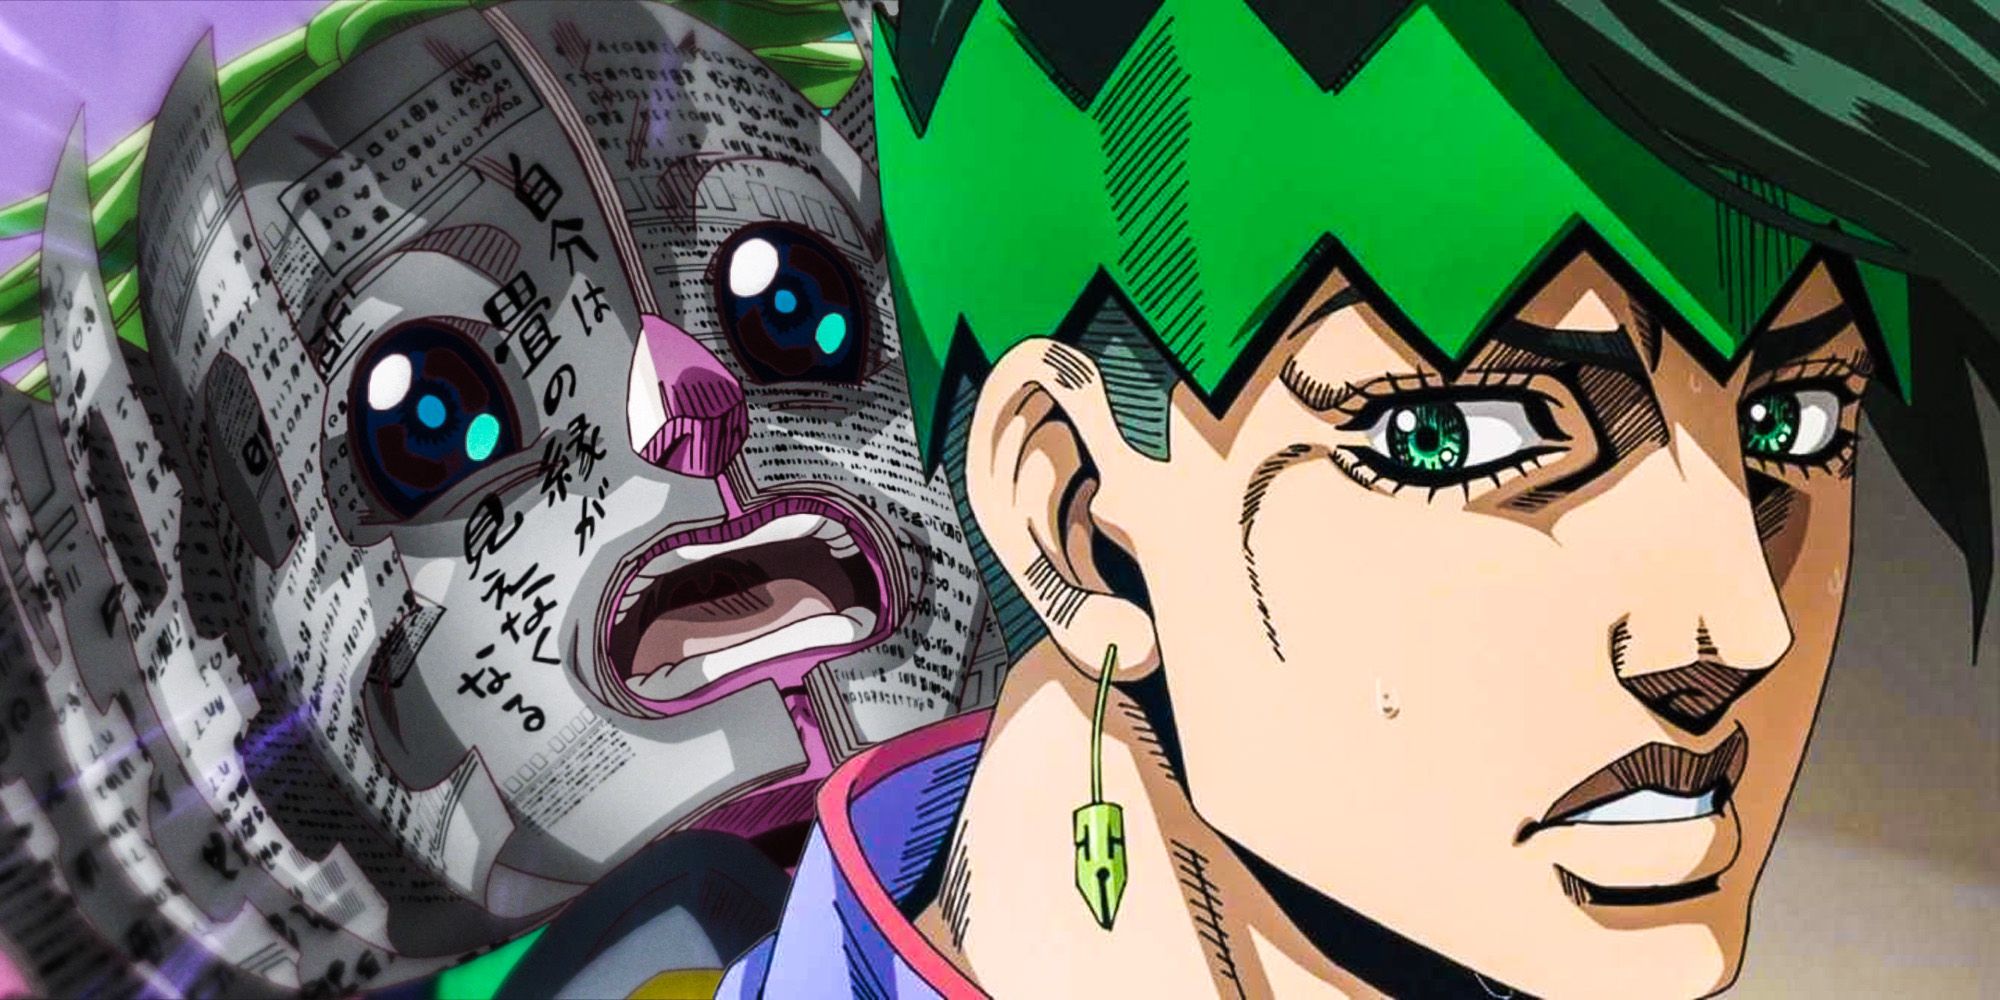 Rohan's ability turns this child's face into a book in Thus Spoke Rohan Kishibe.